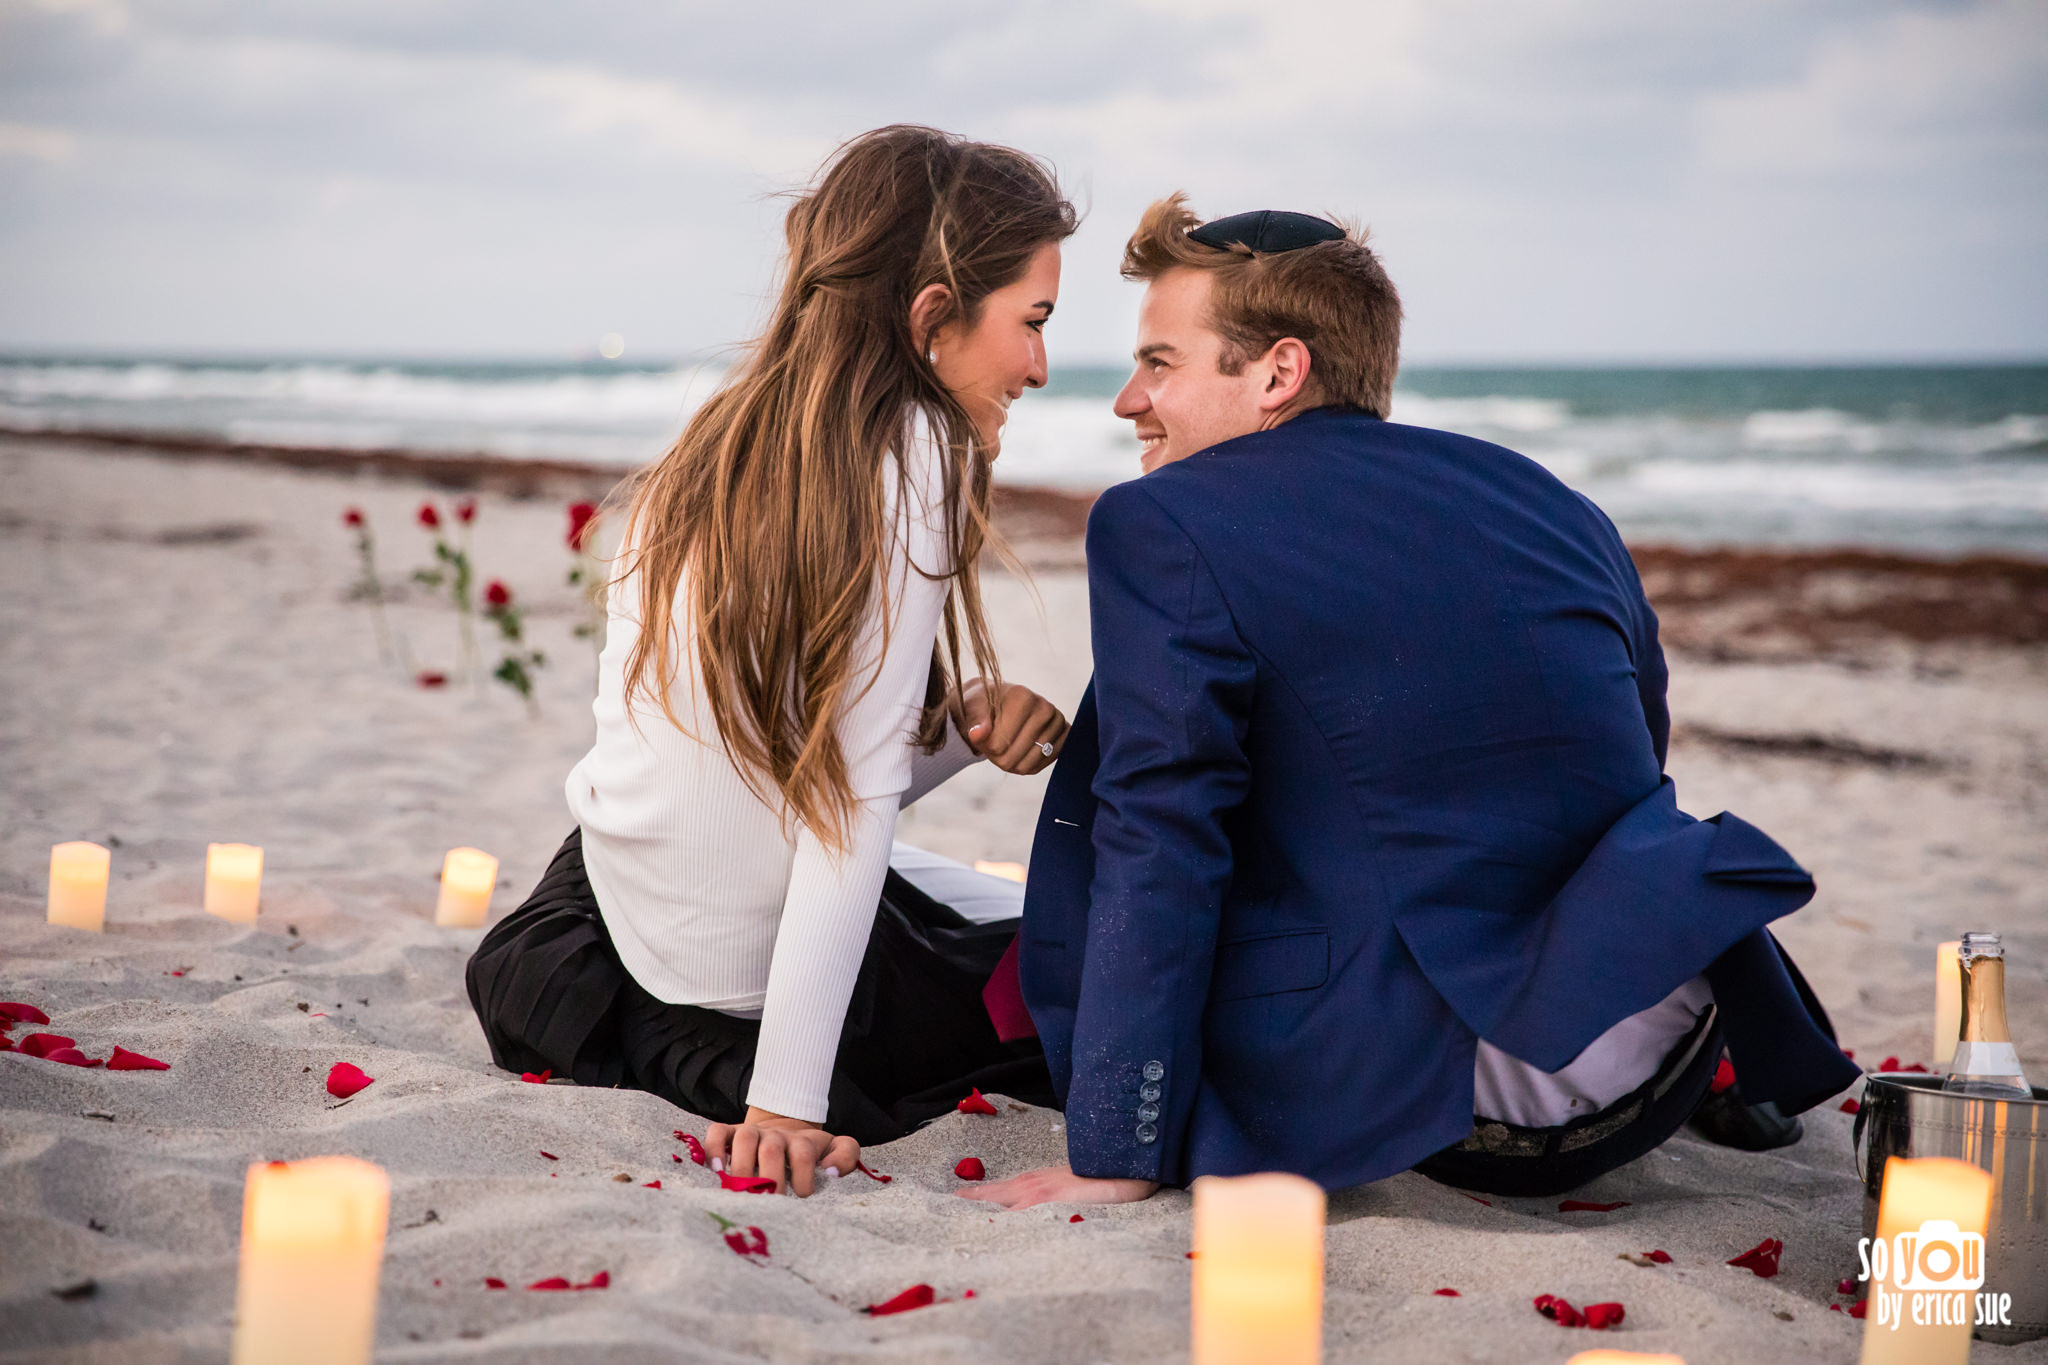 so-you-by-erica-sue-hollywood-fl-photographer-beach-engagement-flowers-candles-5204.jpg